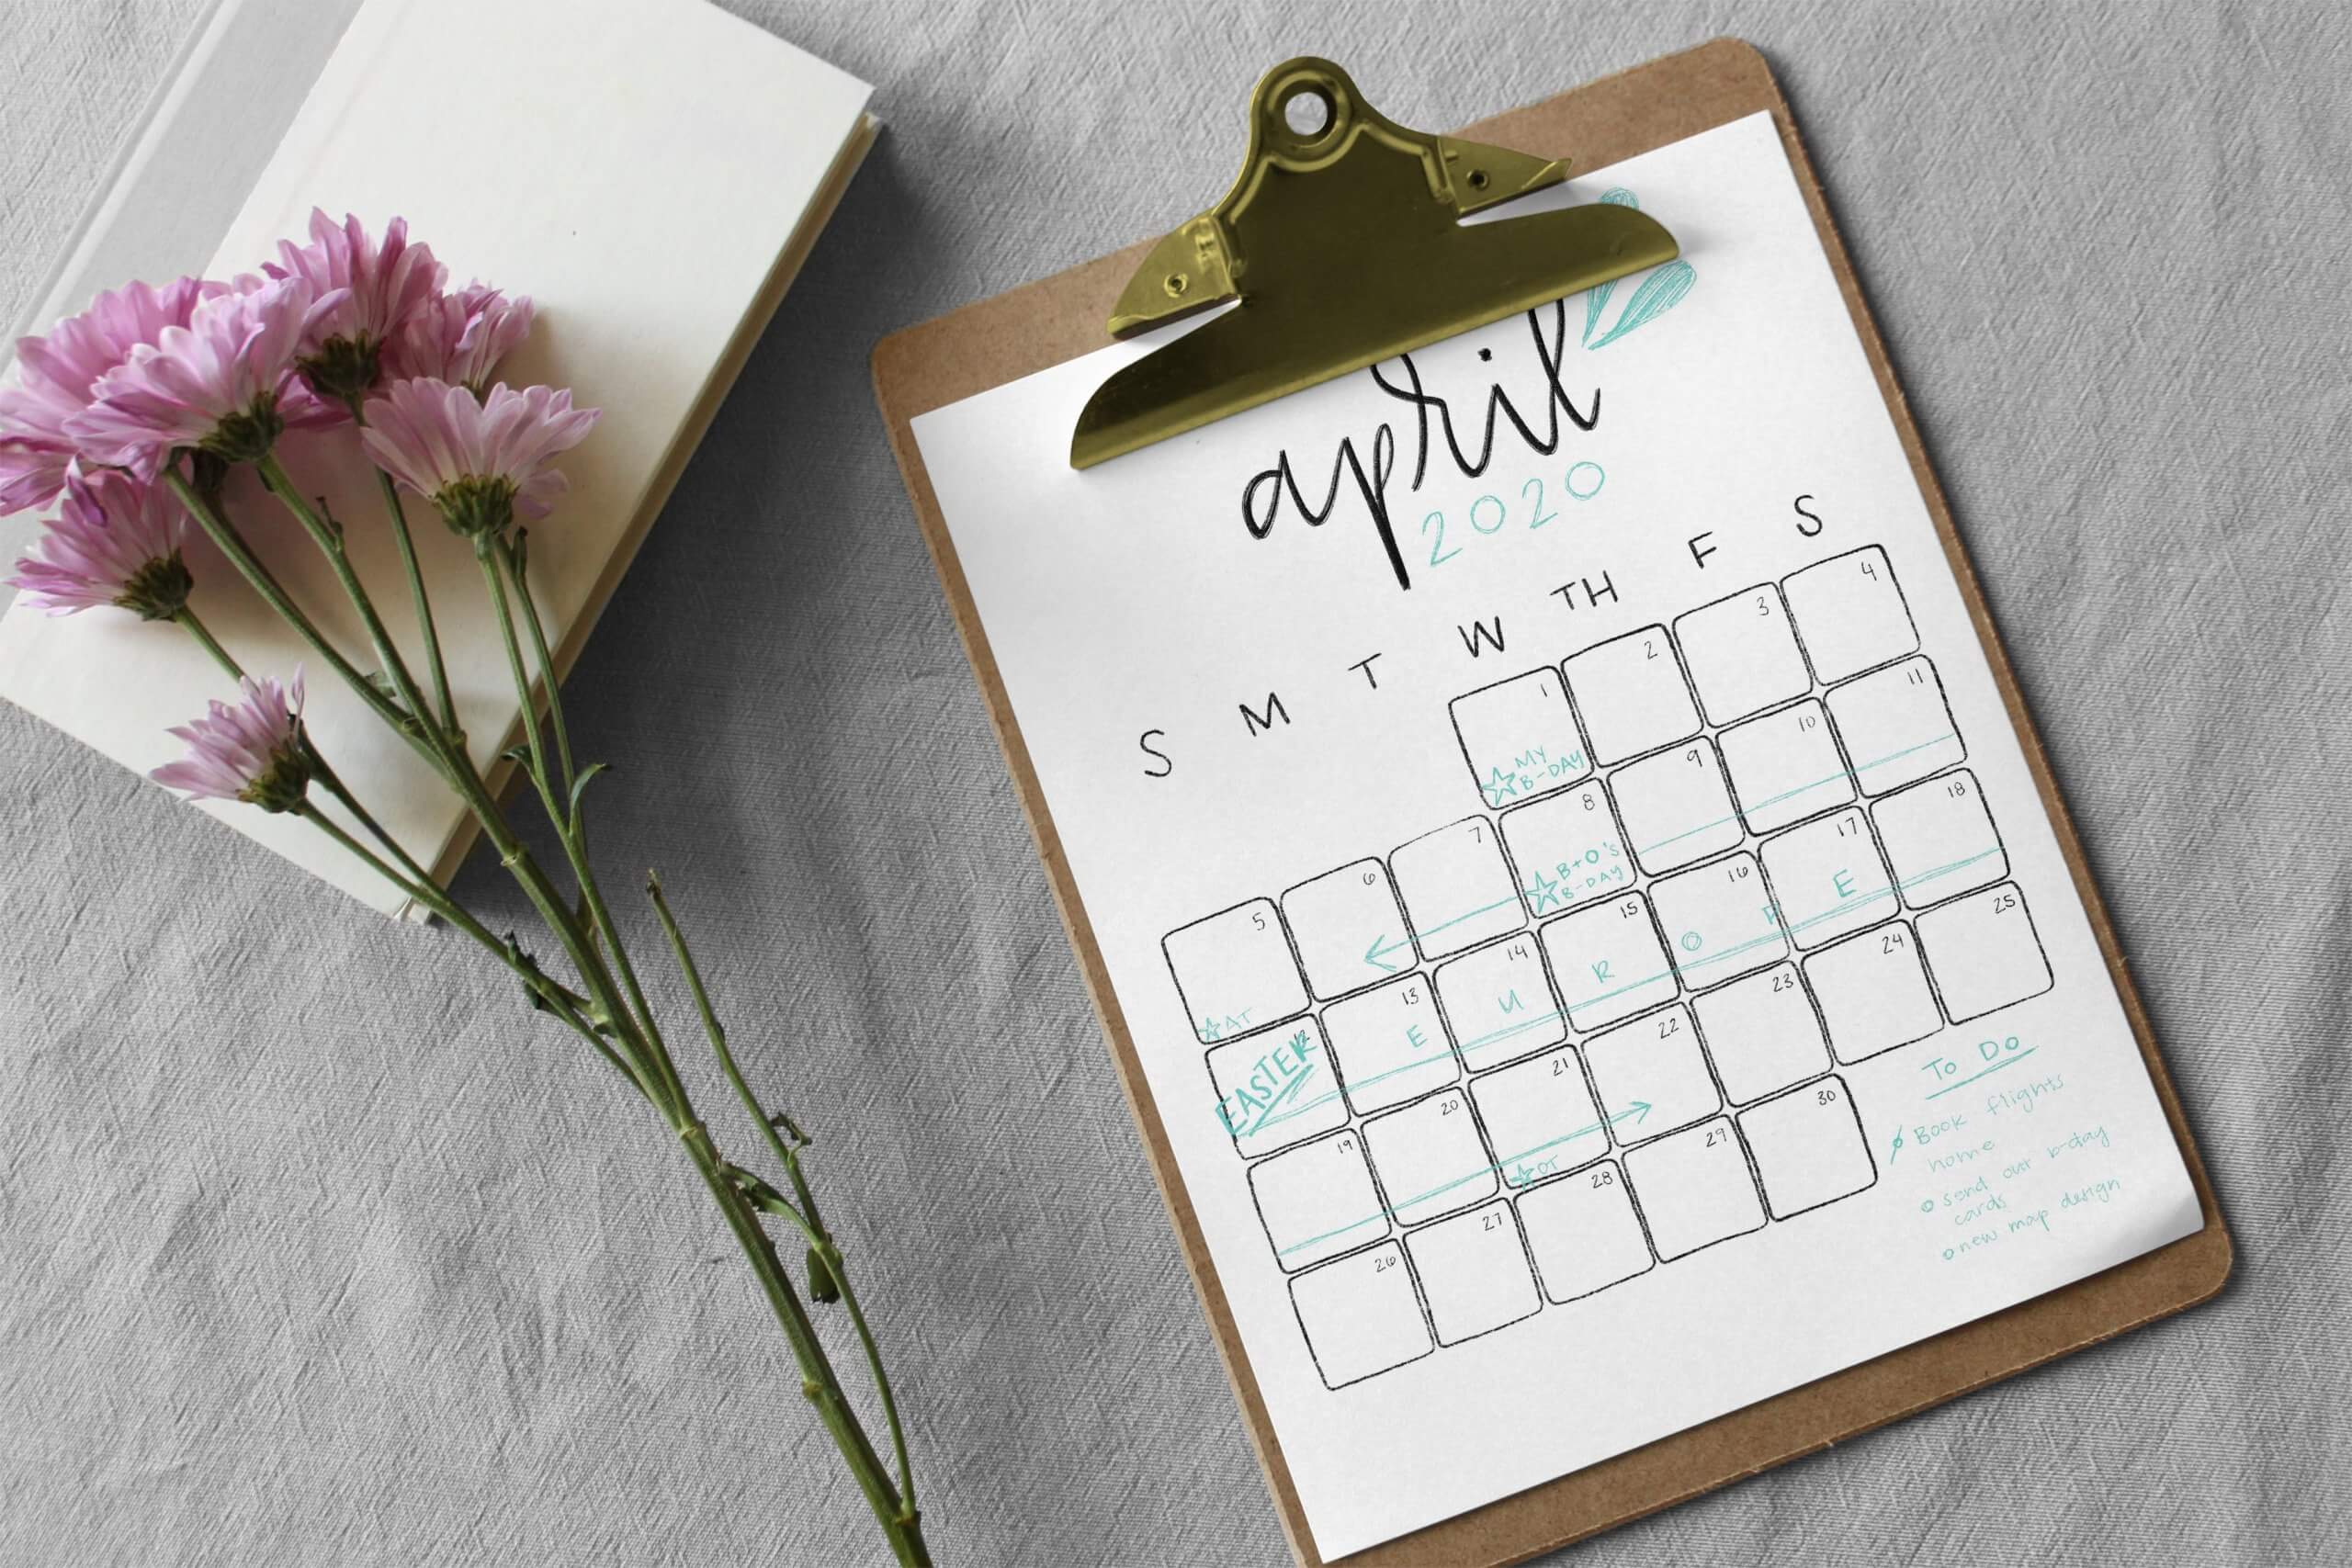 21 Best DIY Calendar Ideas to Add Your Own Style - 161